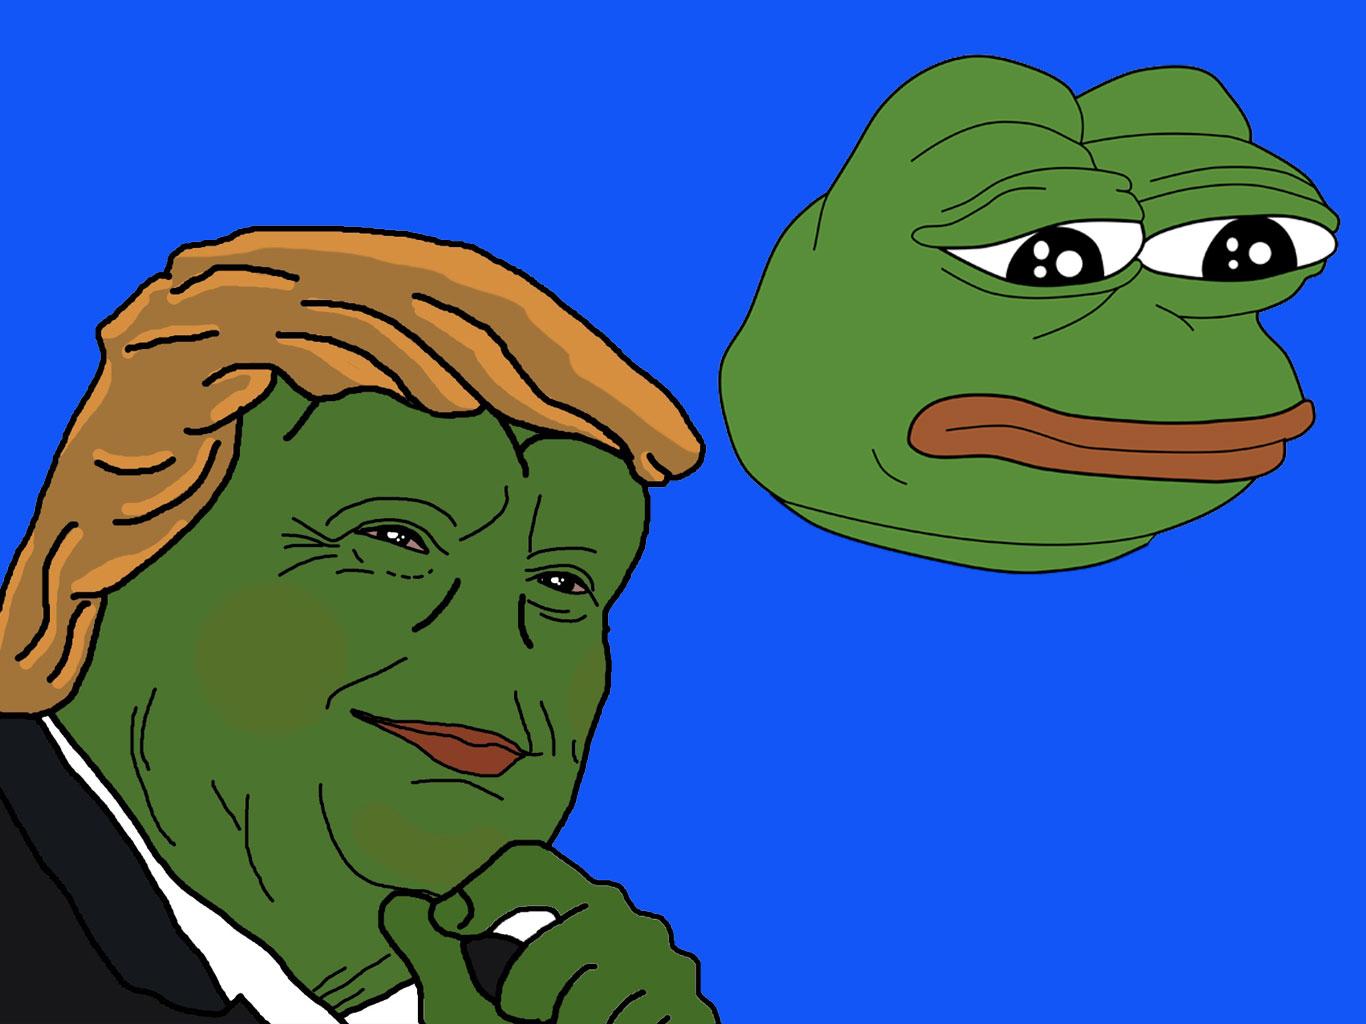 Pepe the Frog meme designated 'hate symbol' by the Anti-Defamation ...